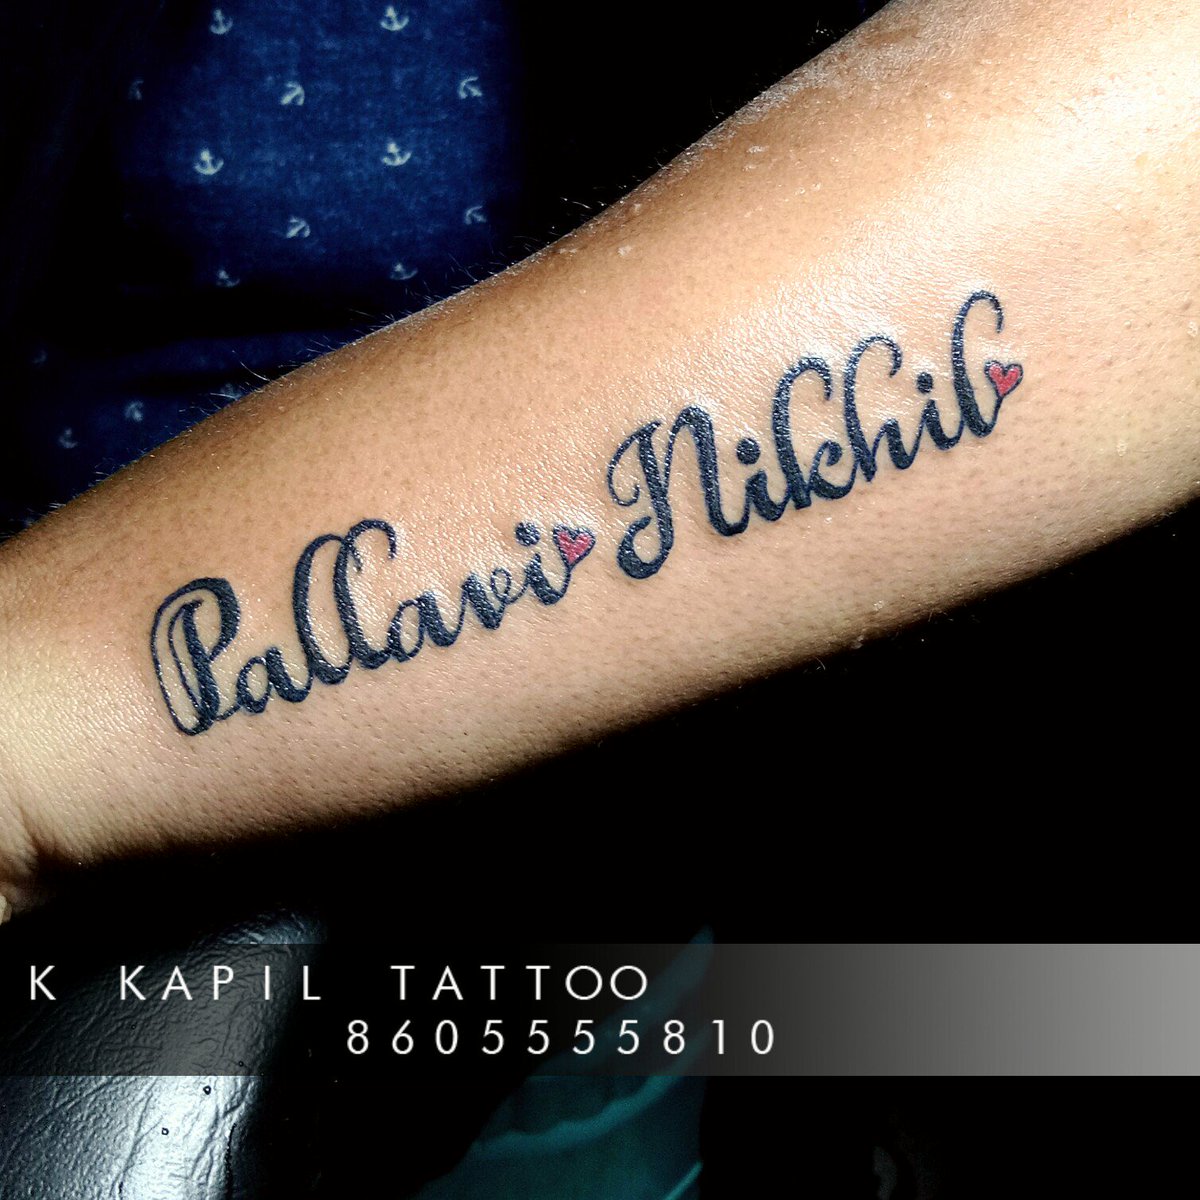 Scissorscut Makeover Studio  Customized Name Tattoo    Get Yours  Done smsludhiana  Book Your Appointments   9815254494 Model Town   9872730417 Civil Lines   inked tattooed tattoo 